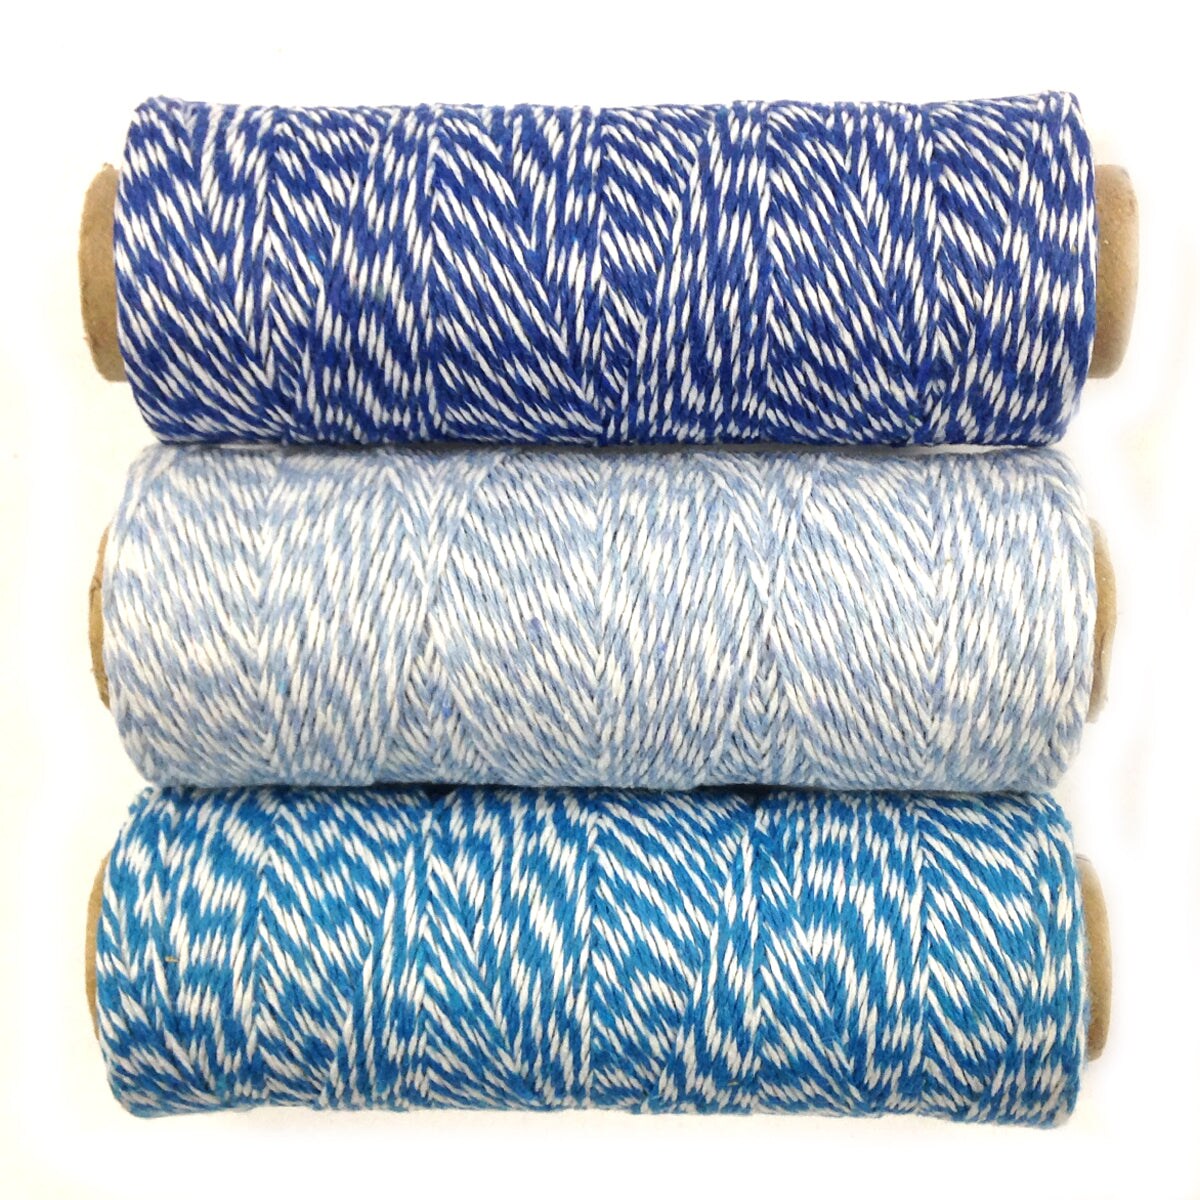 Wrapables Cotton Baker&#x27;s Twine 4ply 330 Yards (Set of 3 Spools x 110 Yards) for Gift Wrapping, Party Decor, and Arts and Craft (Navy, Blue Grey, Blue)